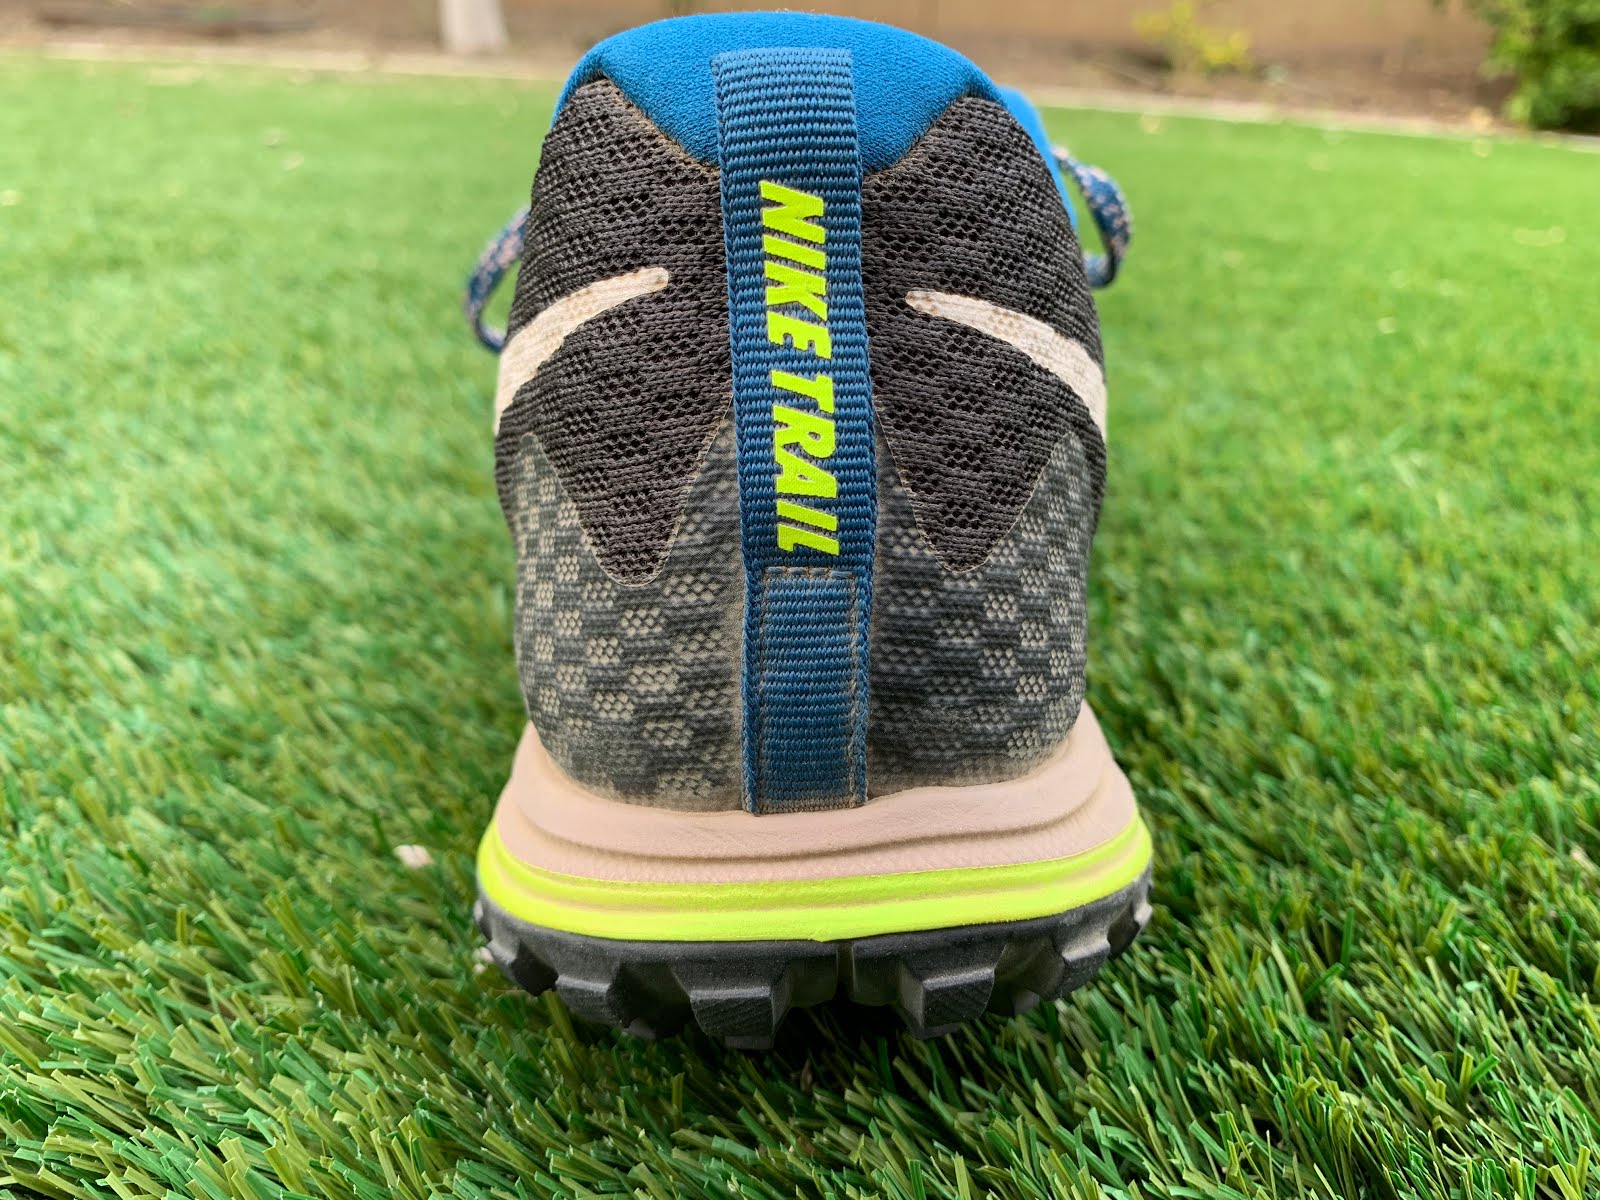 Trail Run: Nike Air Zoom Wildhorse 4 Review - Monster on the in the mud